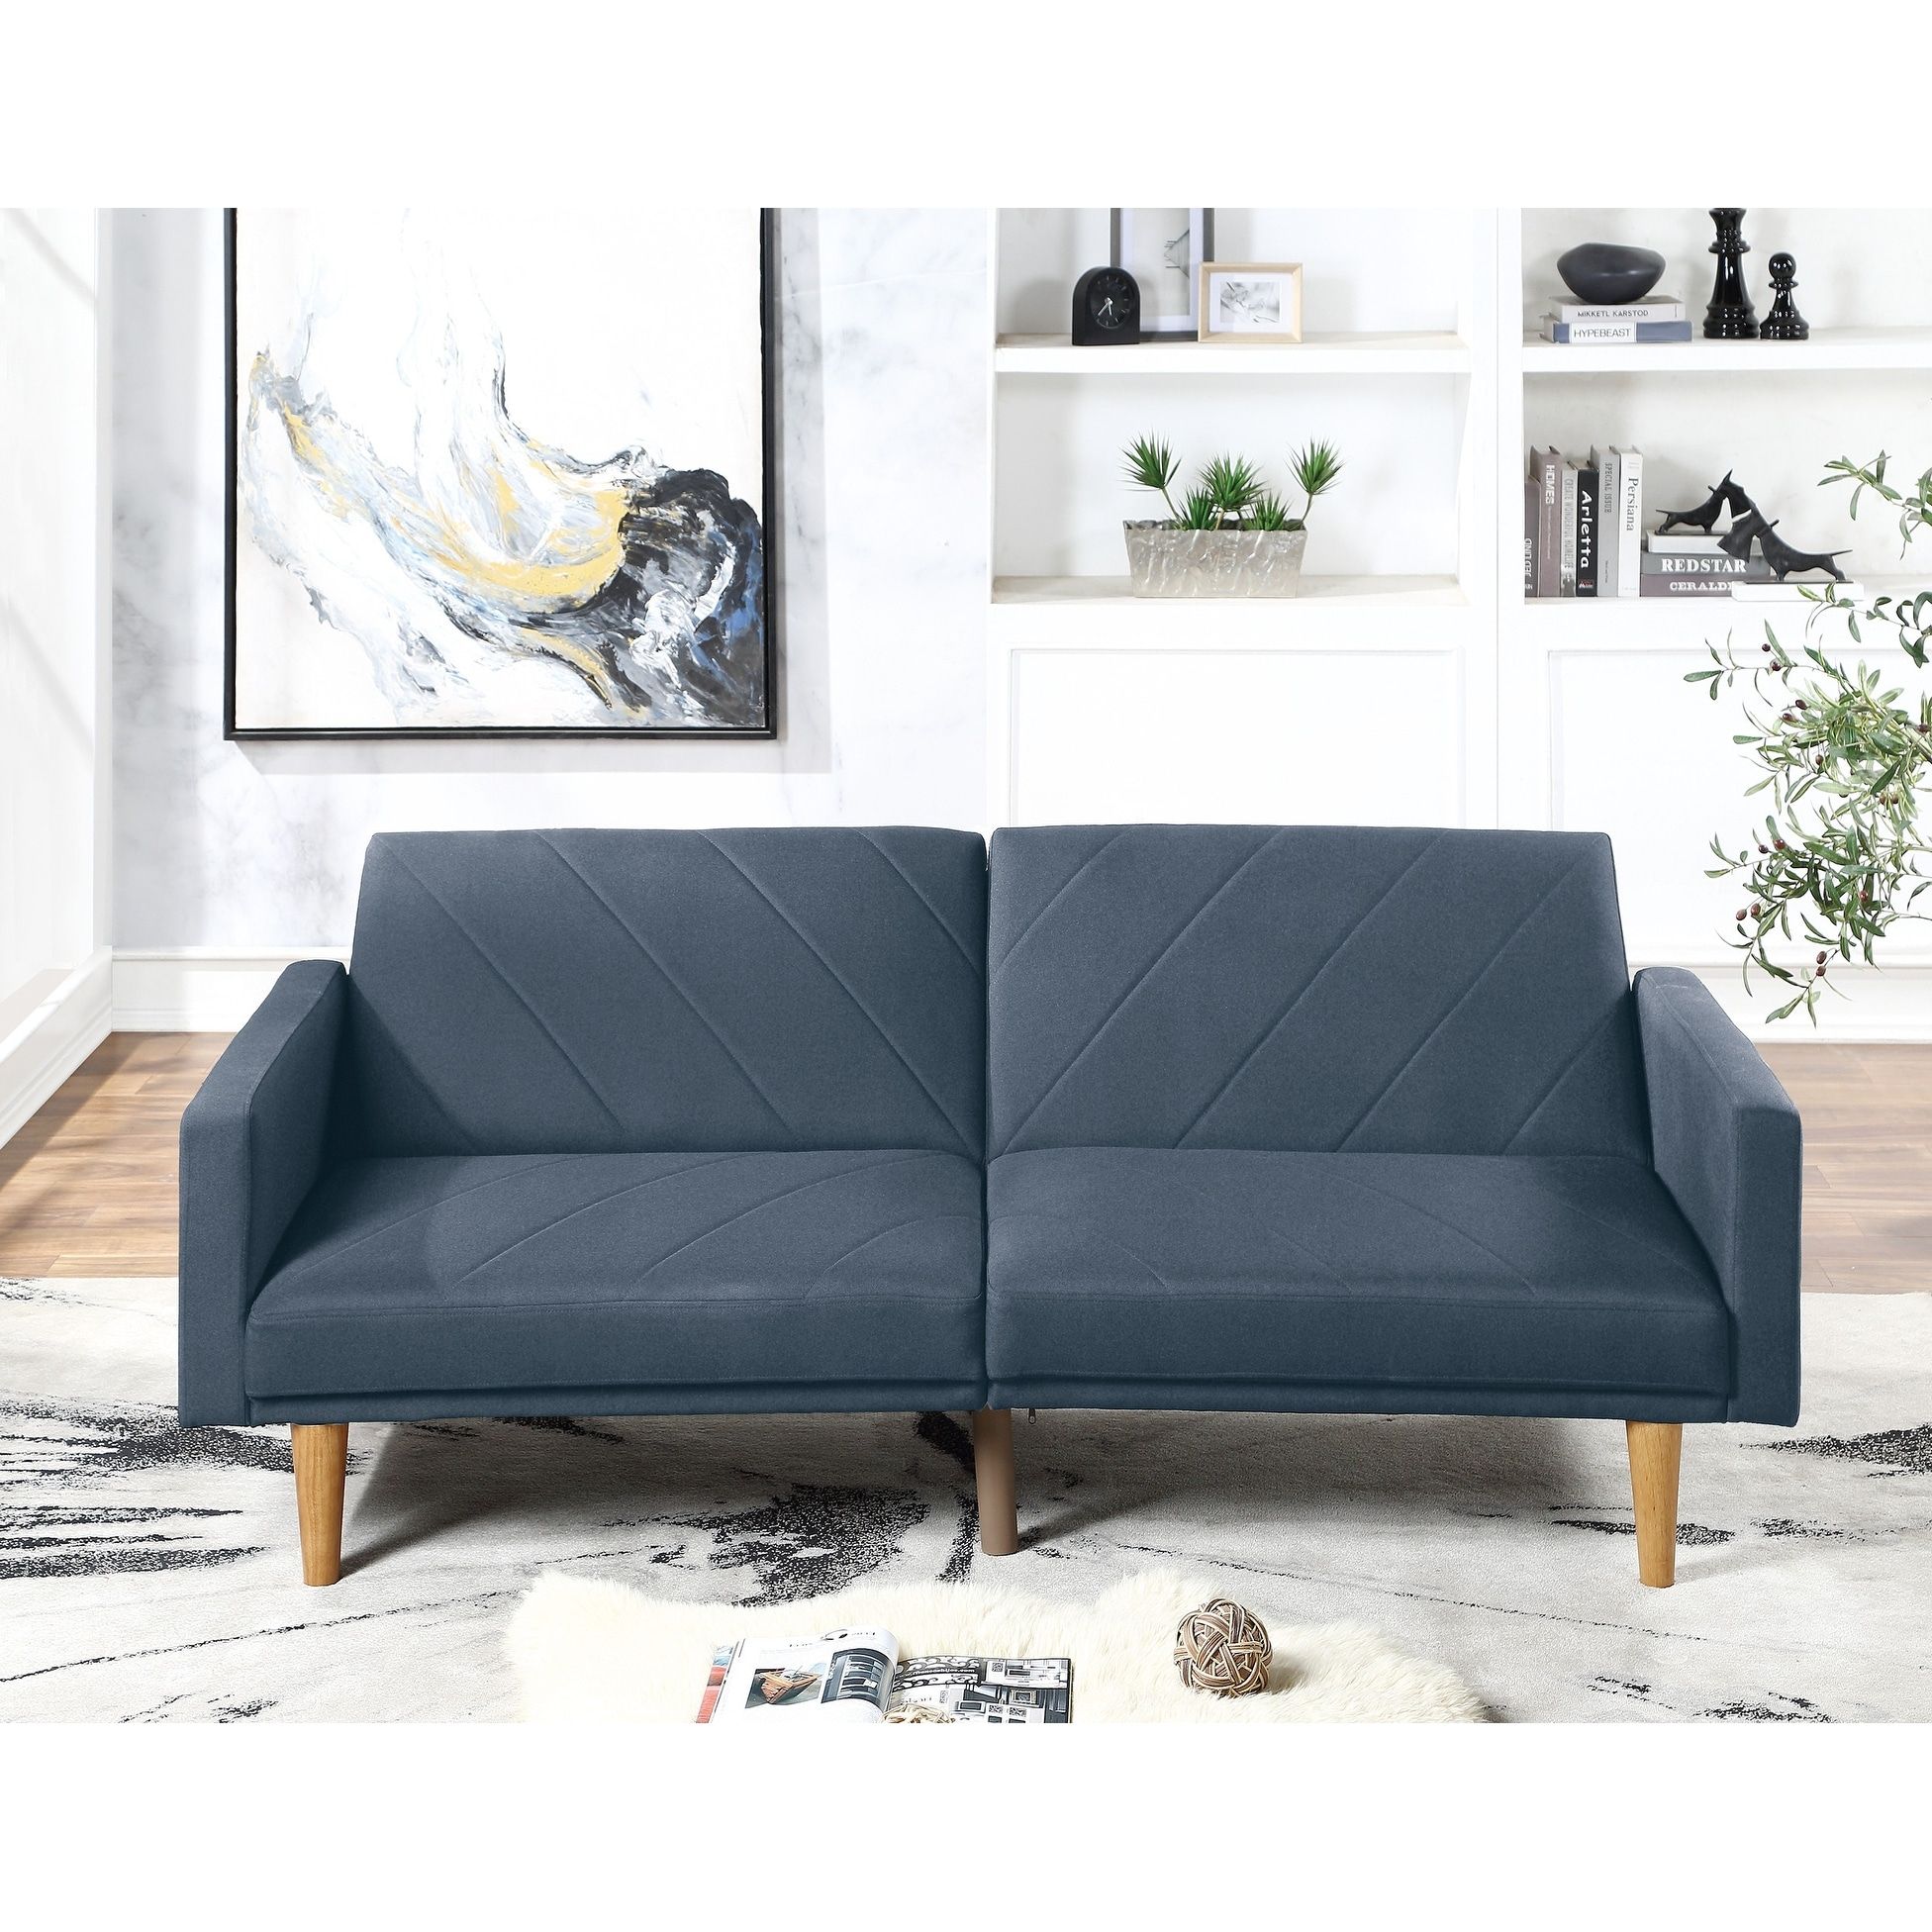 Modern Electric Look 1pc Convertible Sofa Couch Navy Color Linen Like  Fabric Cushion Wooden Legs Living Room – Bed Bath & Beyond – 35204646 Inside Navy Sleeper Sofa Couches (View 5 of 15)